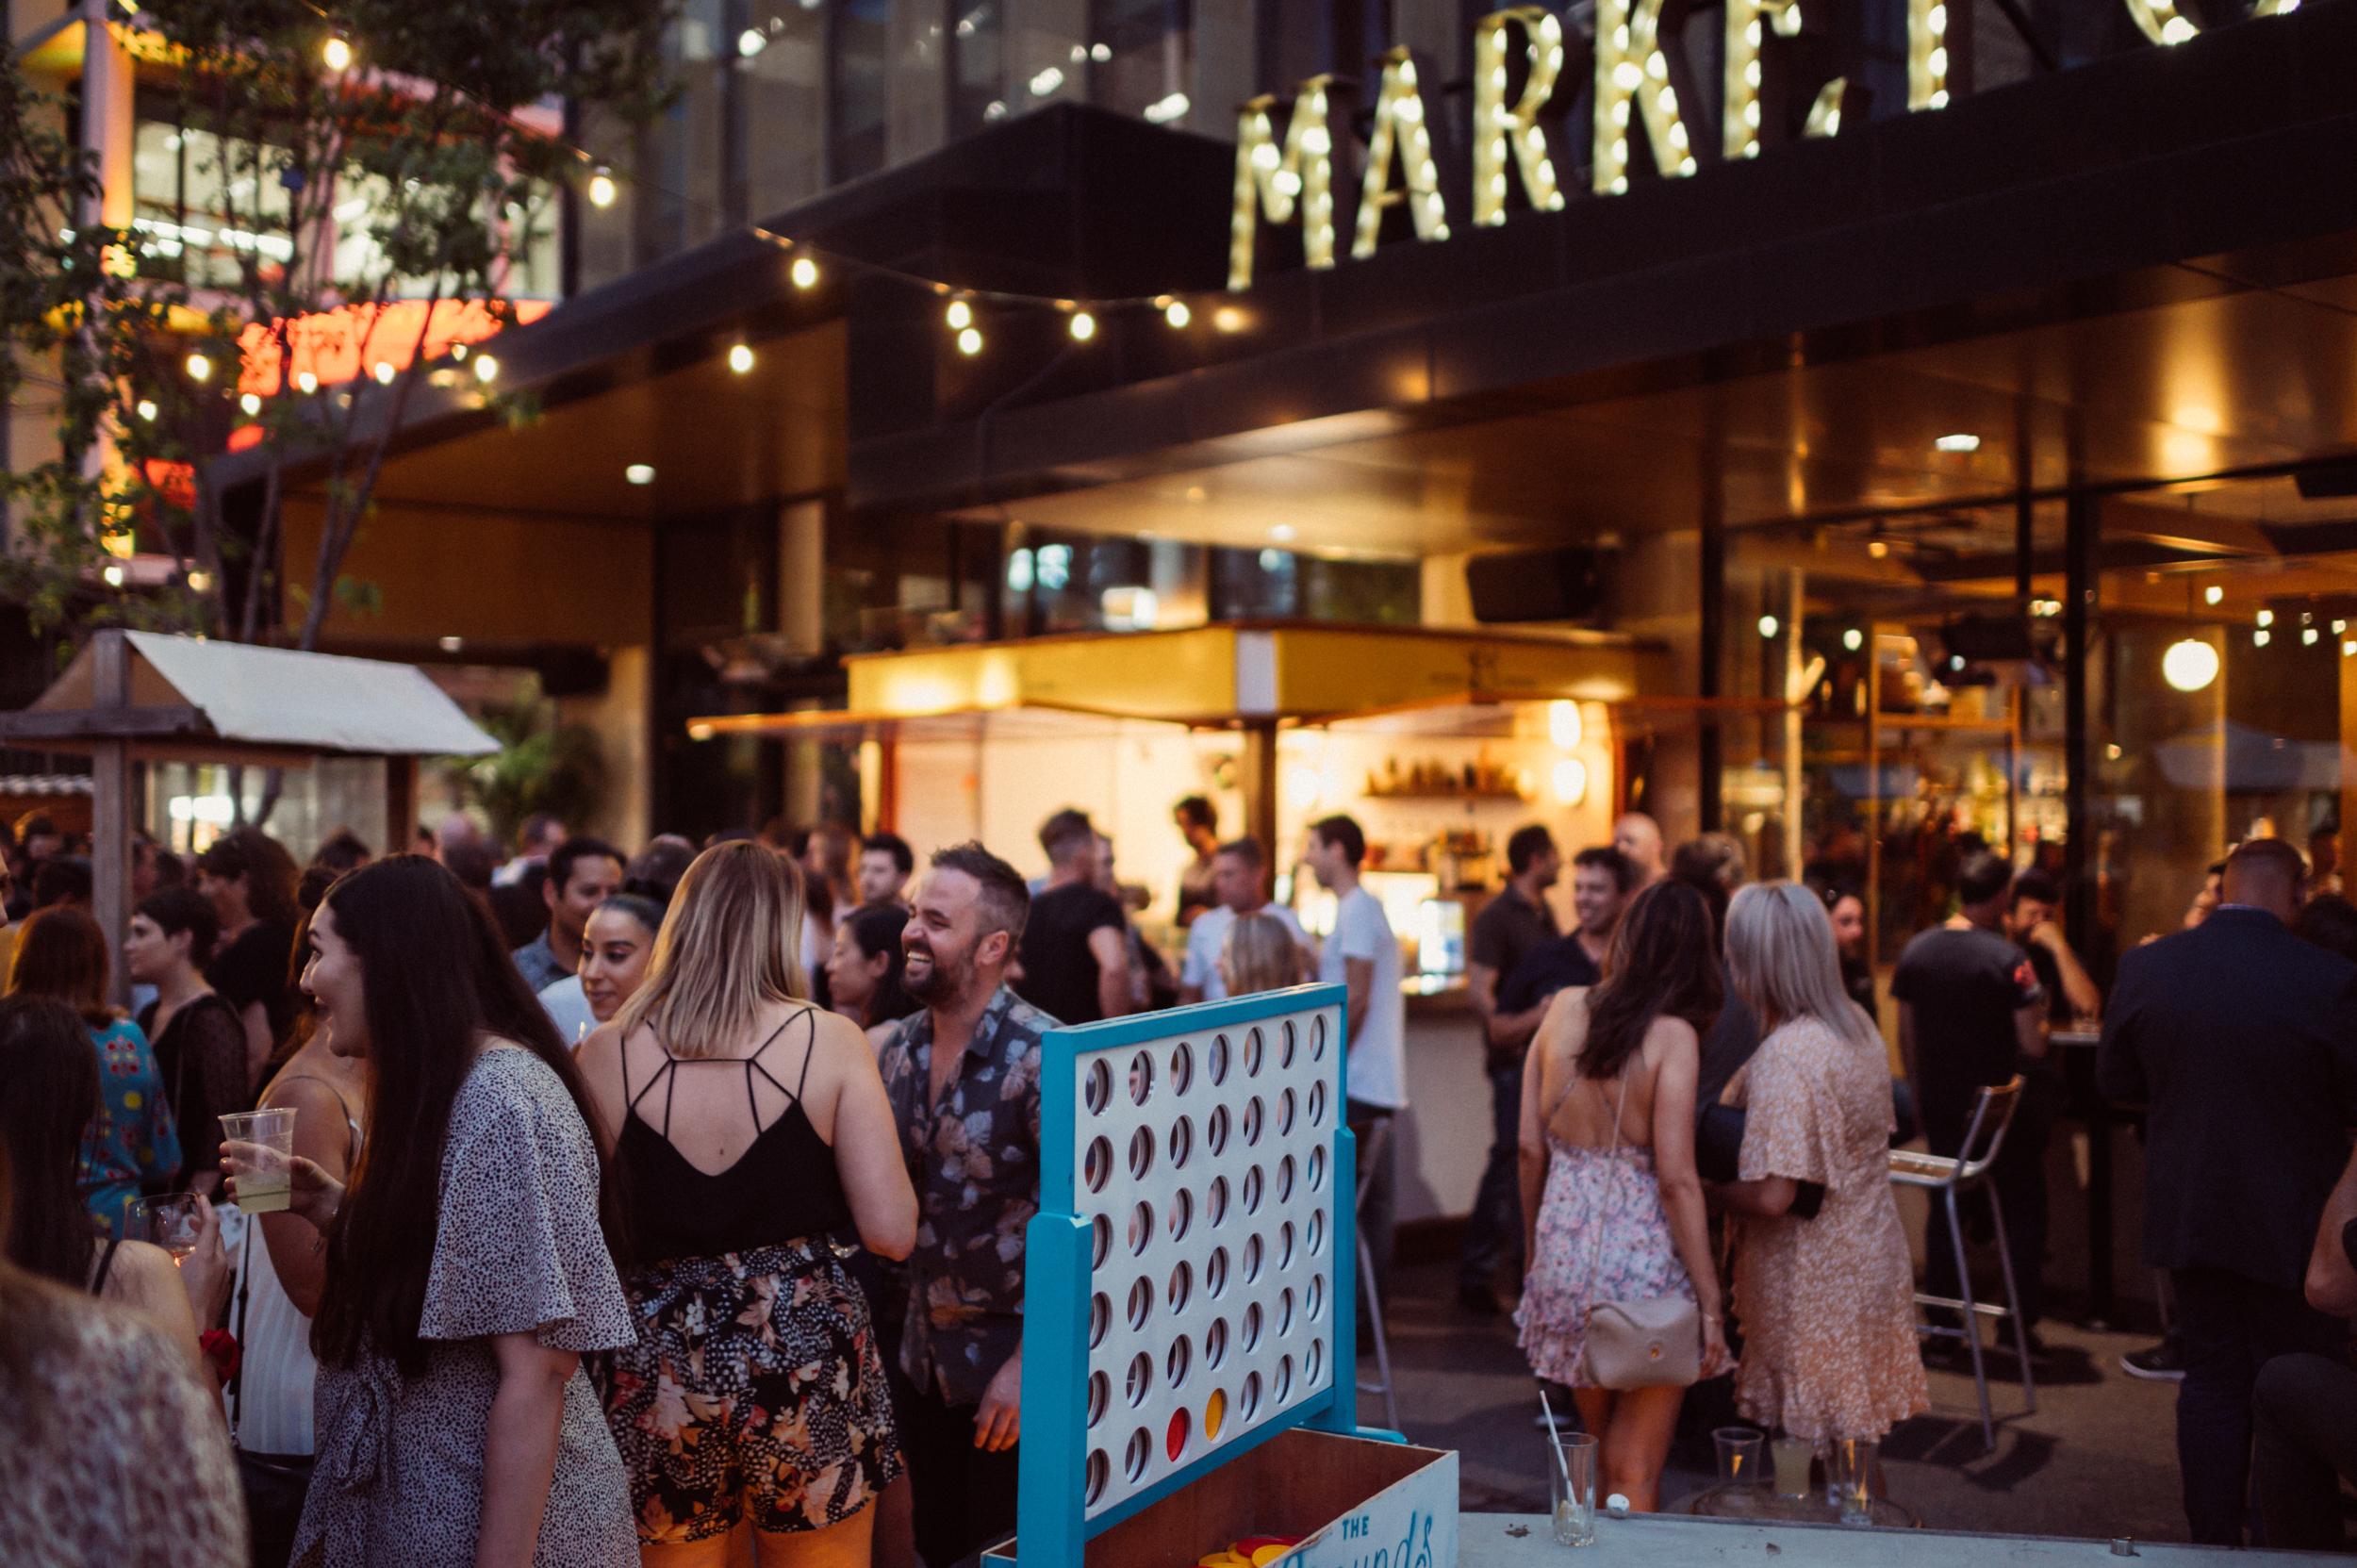 Market Grounds. Photographed by: Shot by Thom. Image supplied